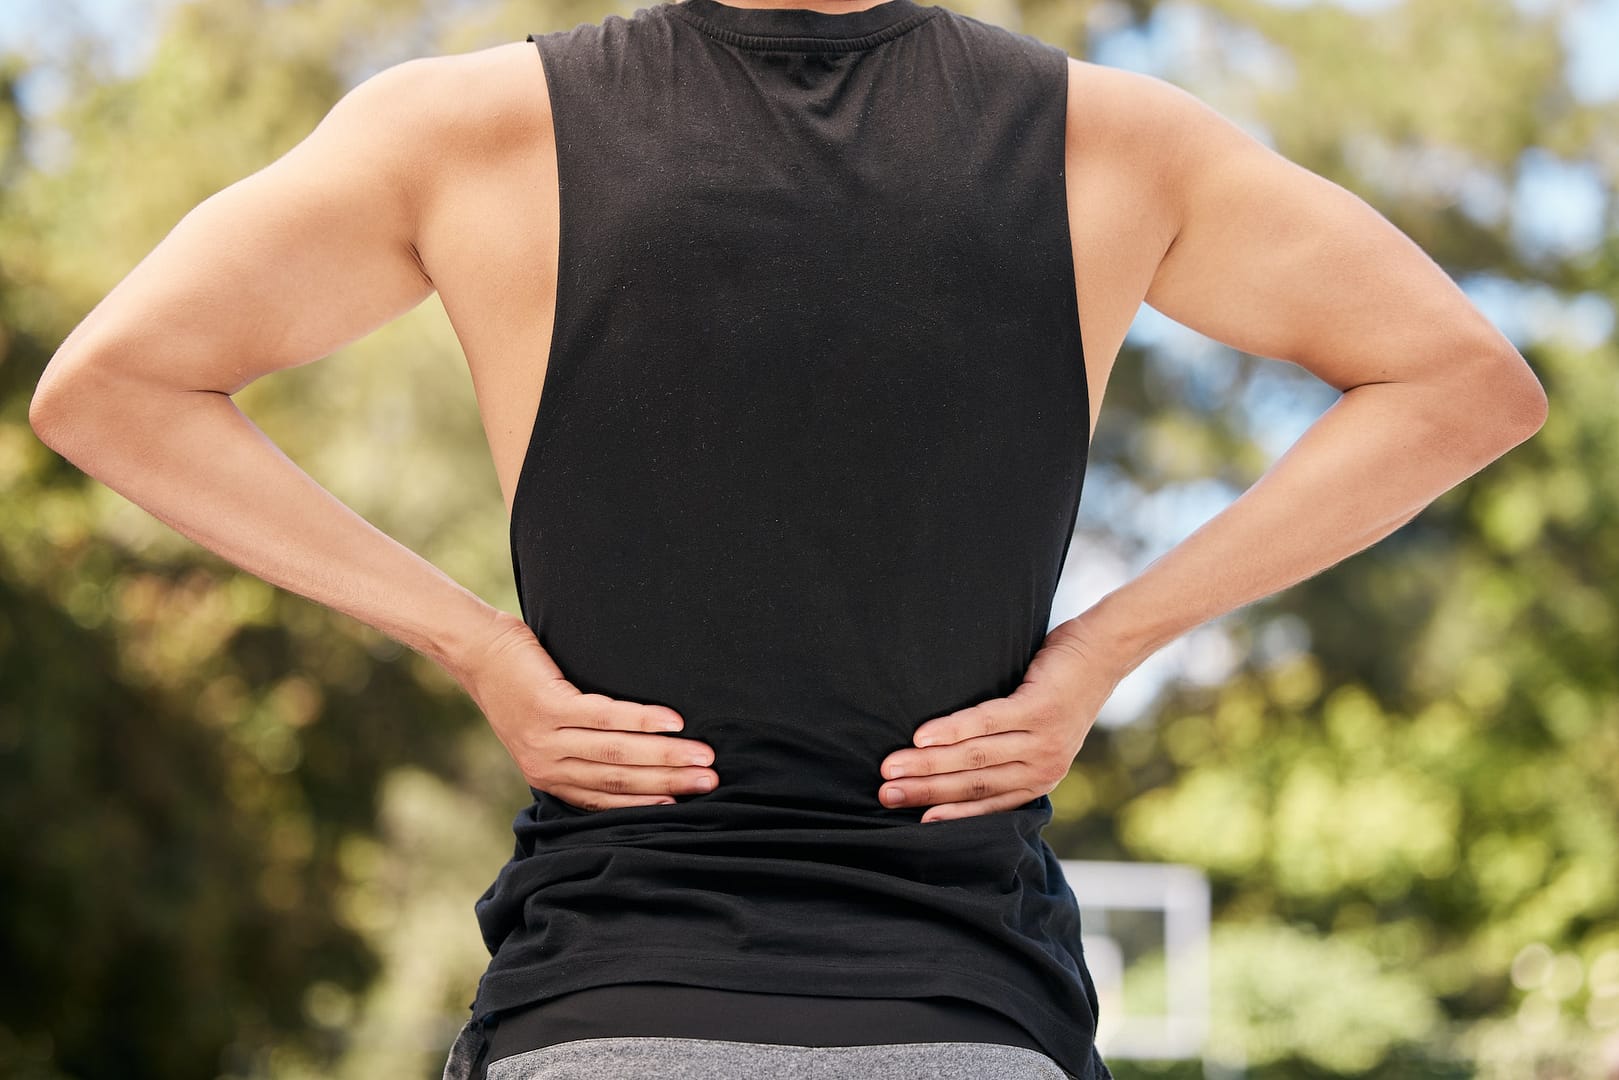 Athlete with back pain, injury or accident from sports match or training on an outdoor court. The Back Pain Project helps with Sports pain in hand Stamford Darien Norwalk and New Canaan 203-656-3638